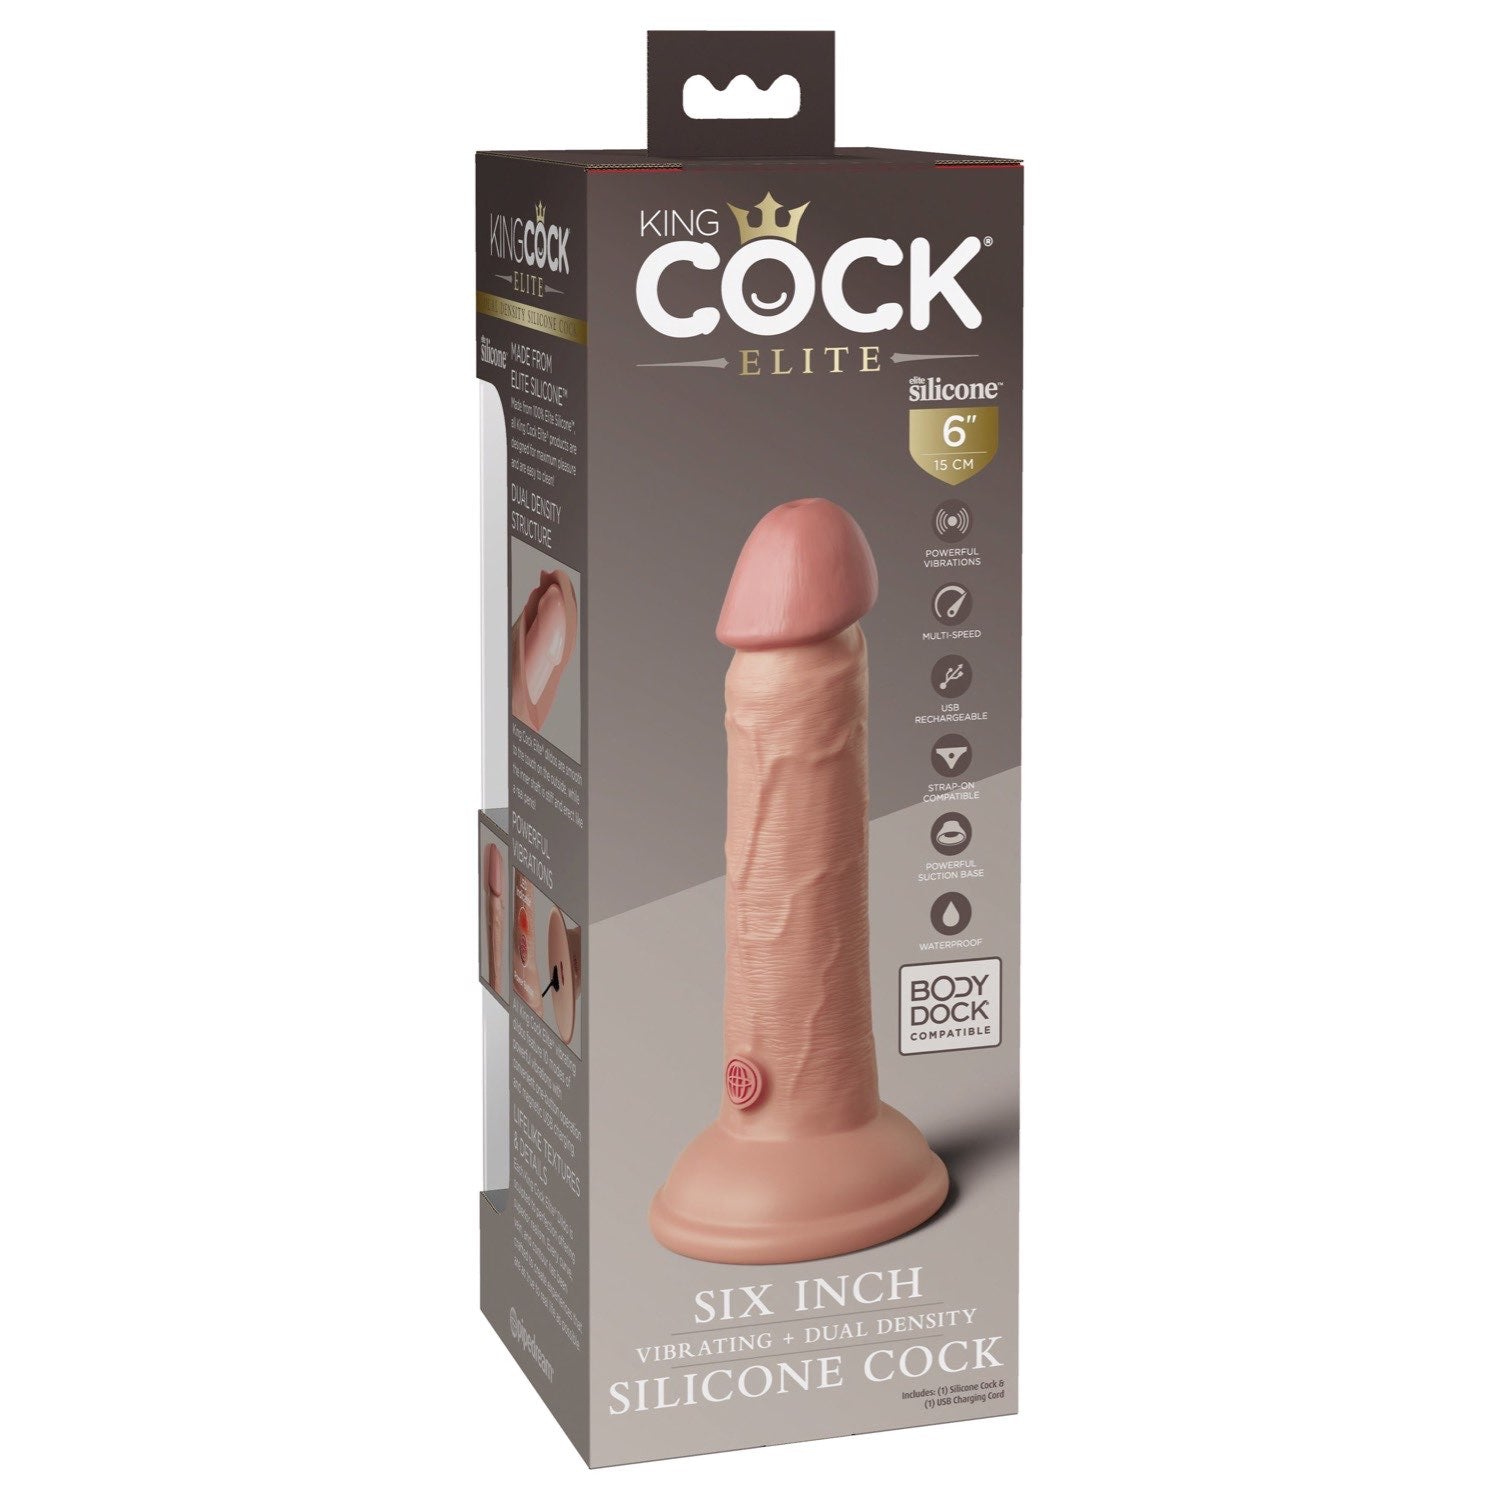 King Cock Elite 6&quot; Vibrating Dual Density Cock - Flesh - Flesh 15.2 cm USB Rechargeable Vibrating Dong by Pipedream